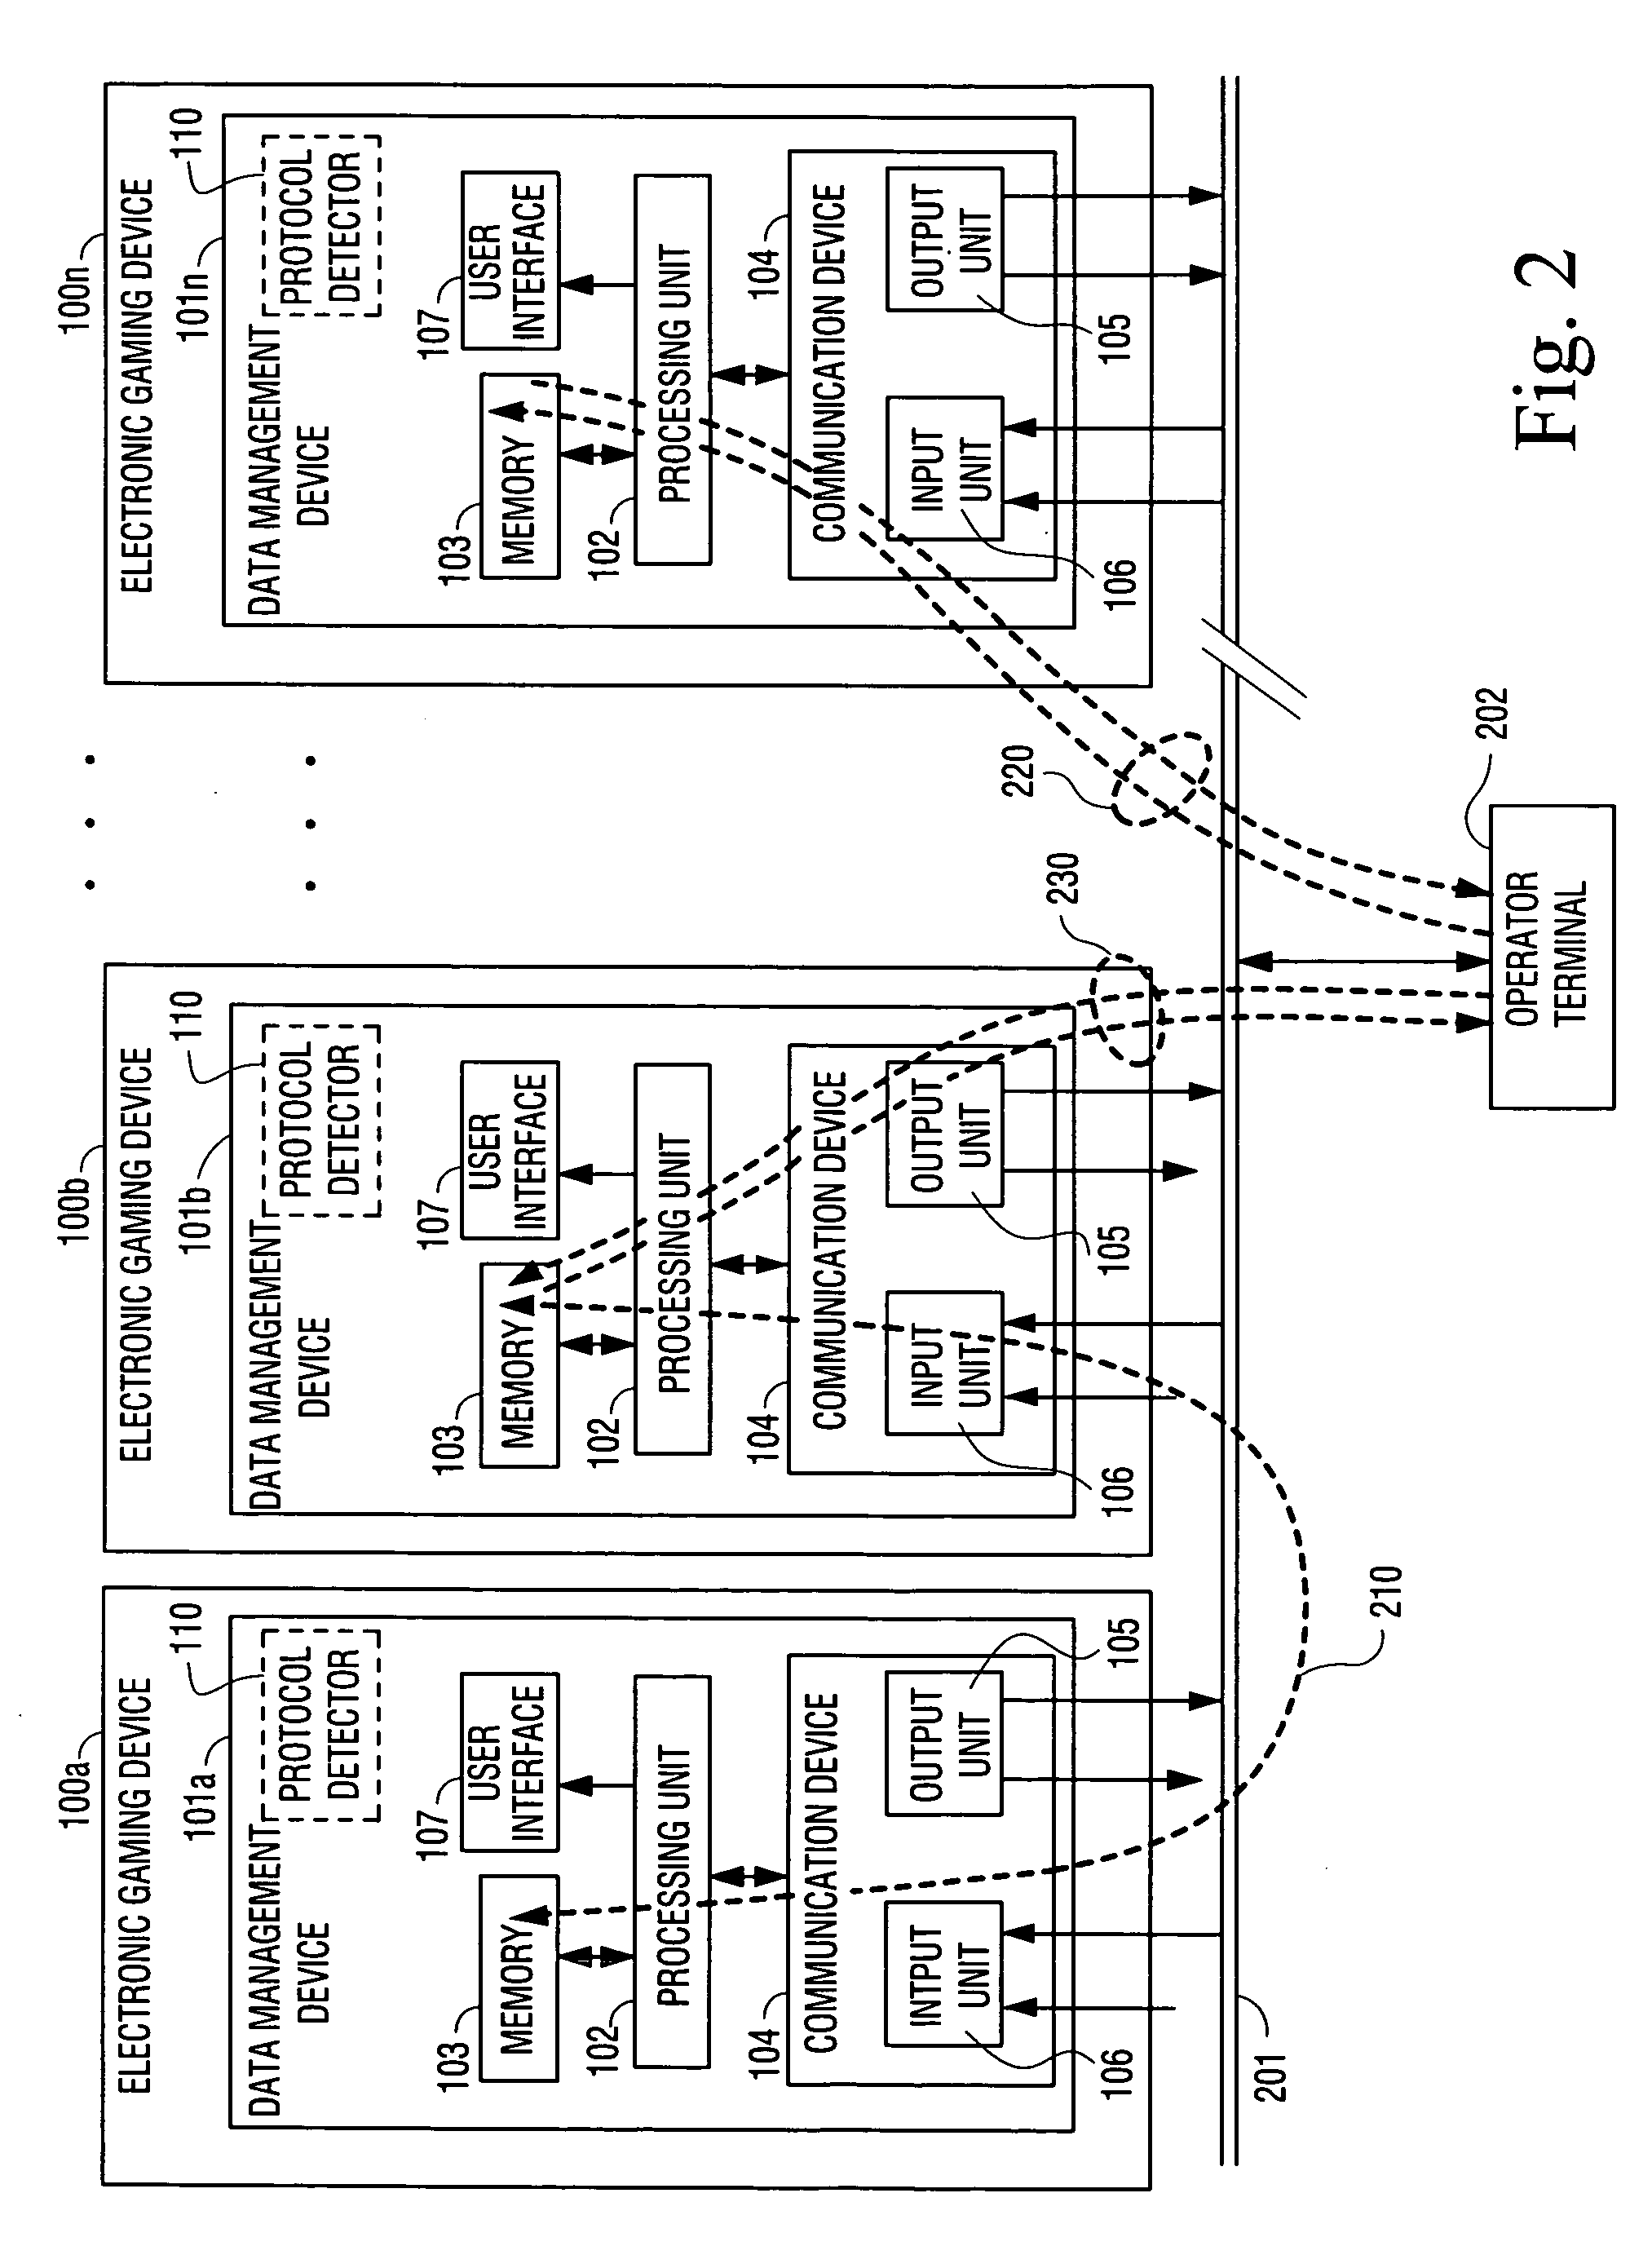 Data management device within an electronic gaming device and a method for monitoring electronic gaming devices